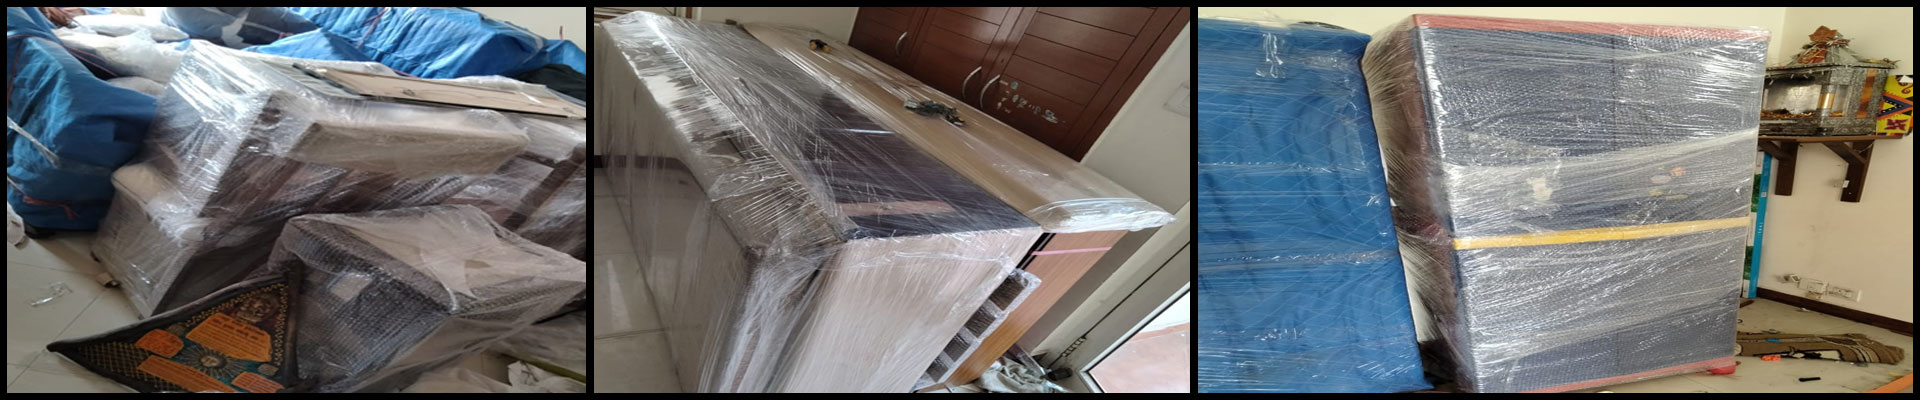 Blog Banner - Packers And Movers Services In India